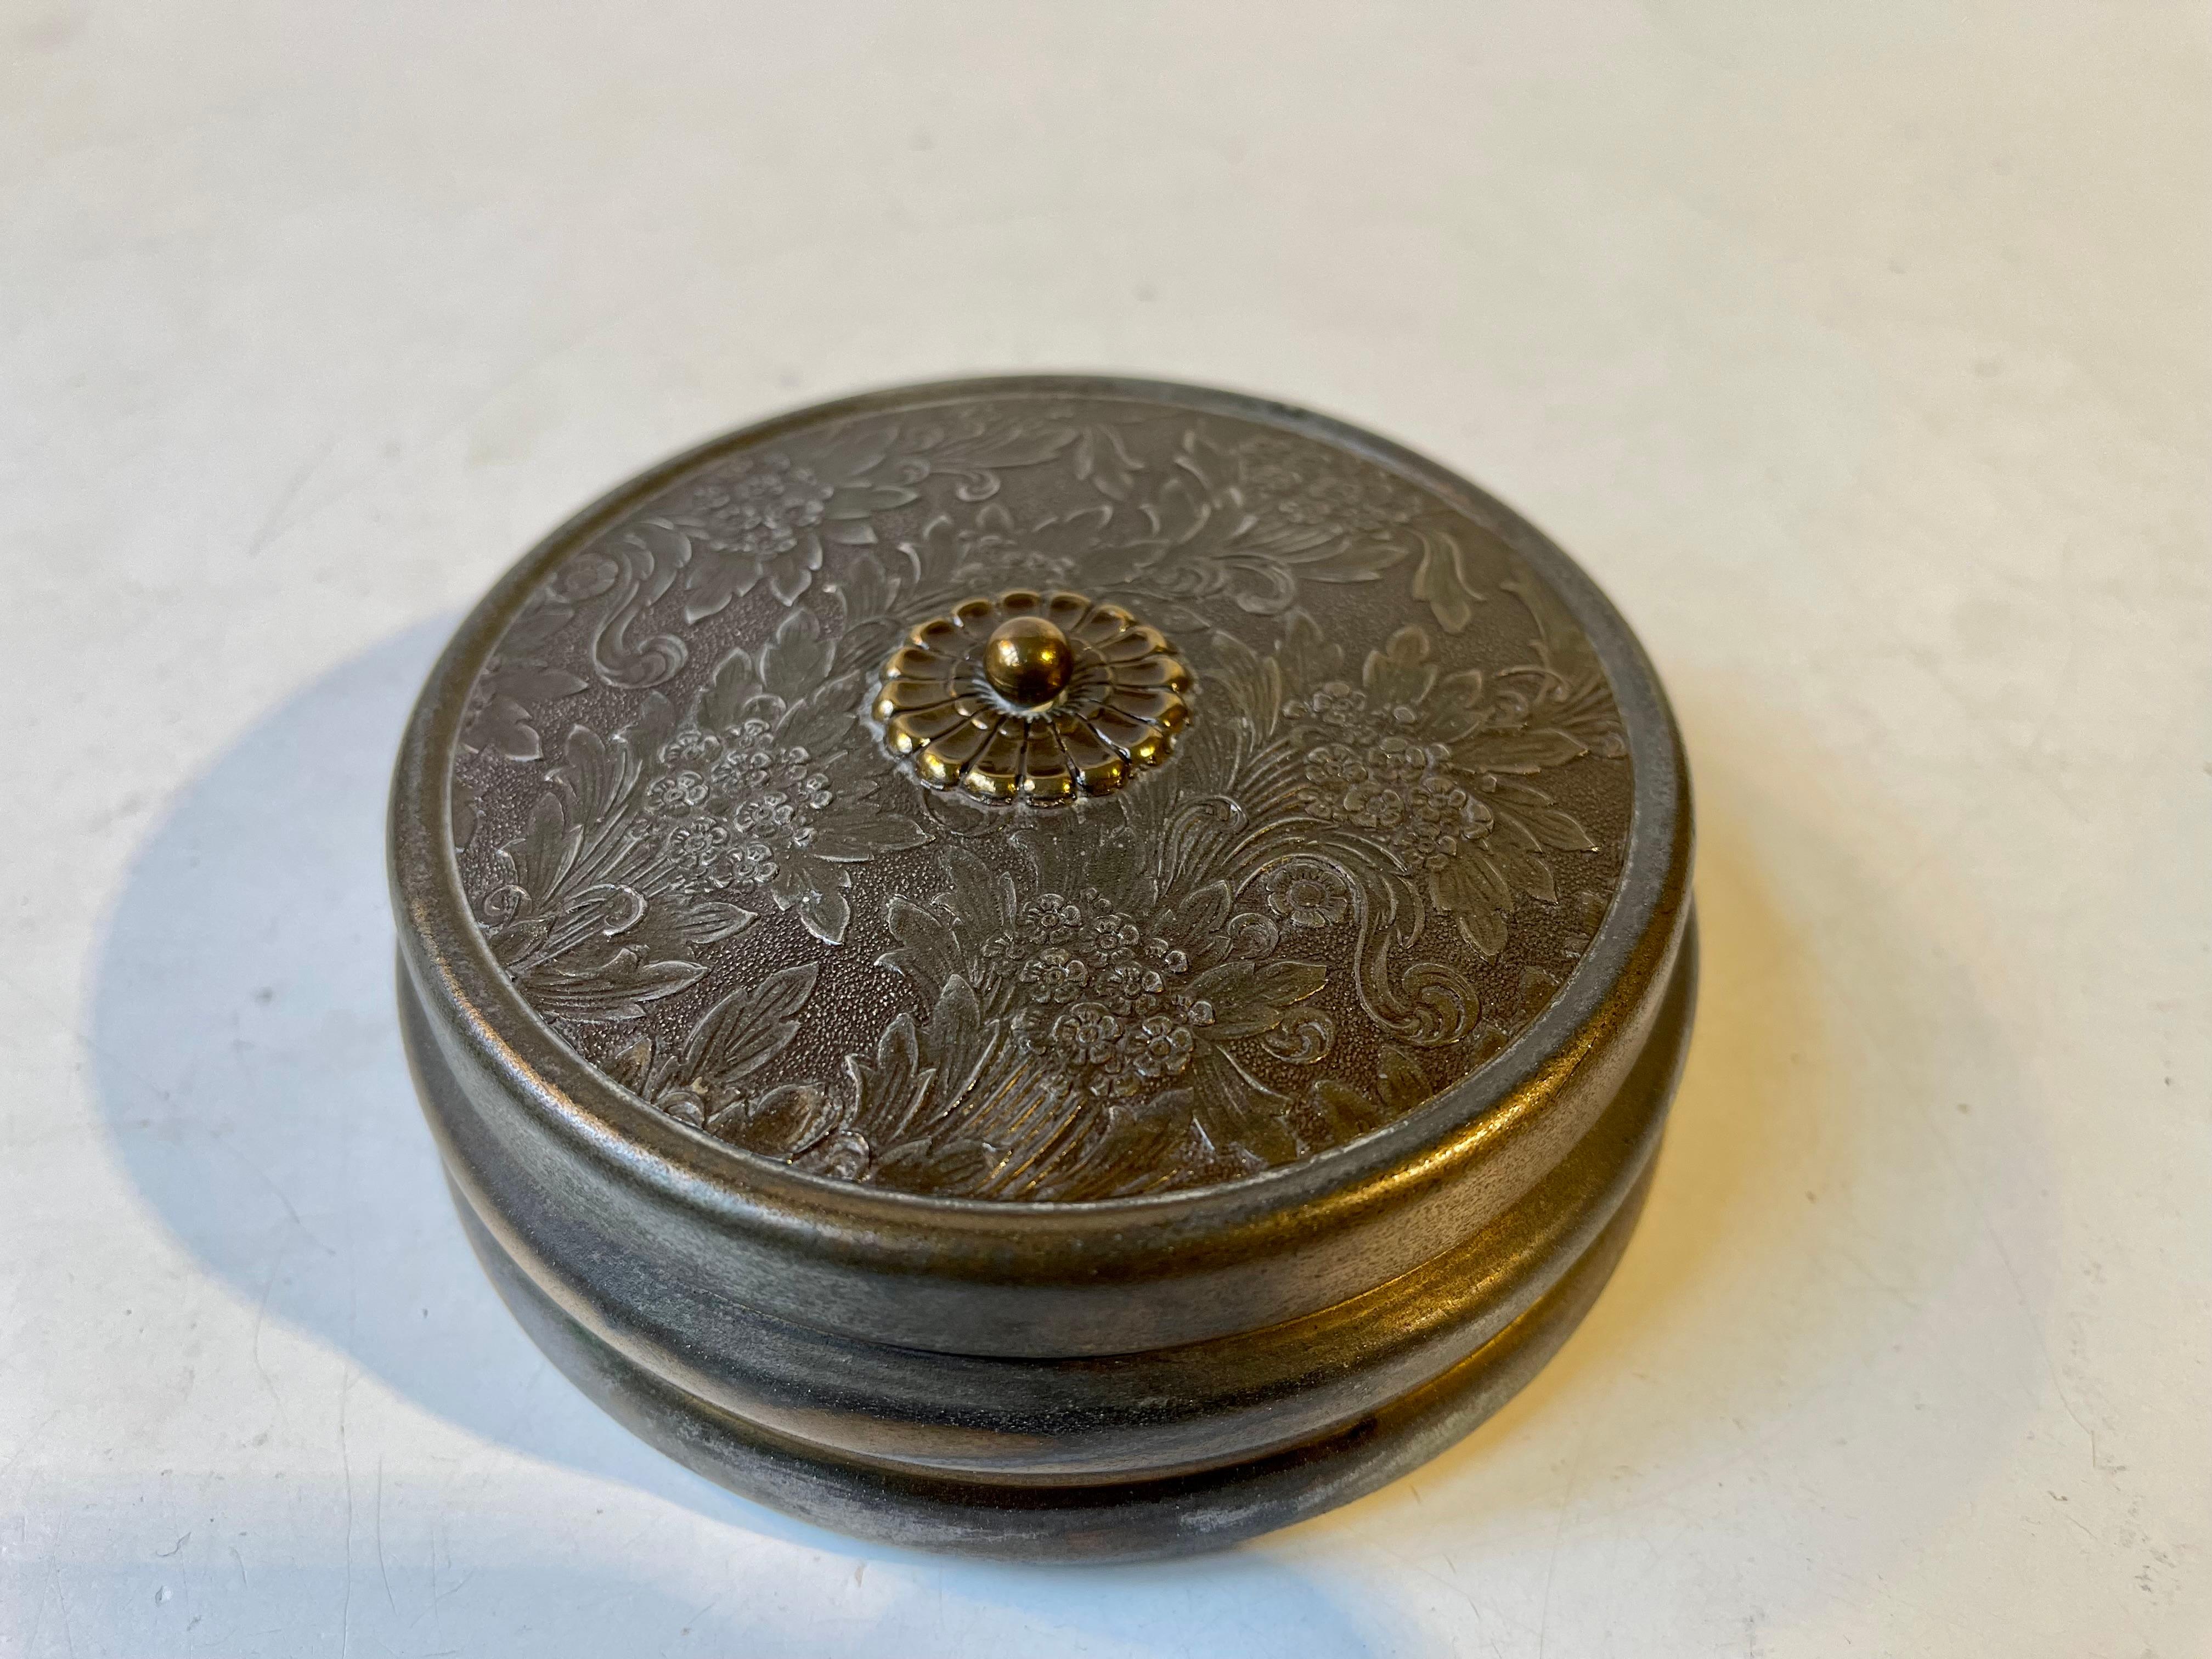 Japanese inspired jewelry trinket in bronze. The lid is hand- decorated/cut in relief depicting bouquets of flowers. It has a red velvet interior and a mirror to the underside of the flipping lid. This piece is marked Bronze and was made by an